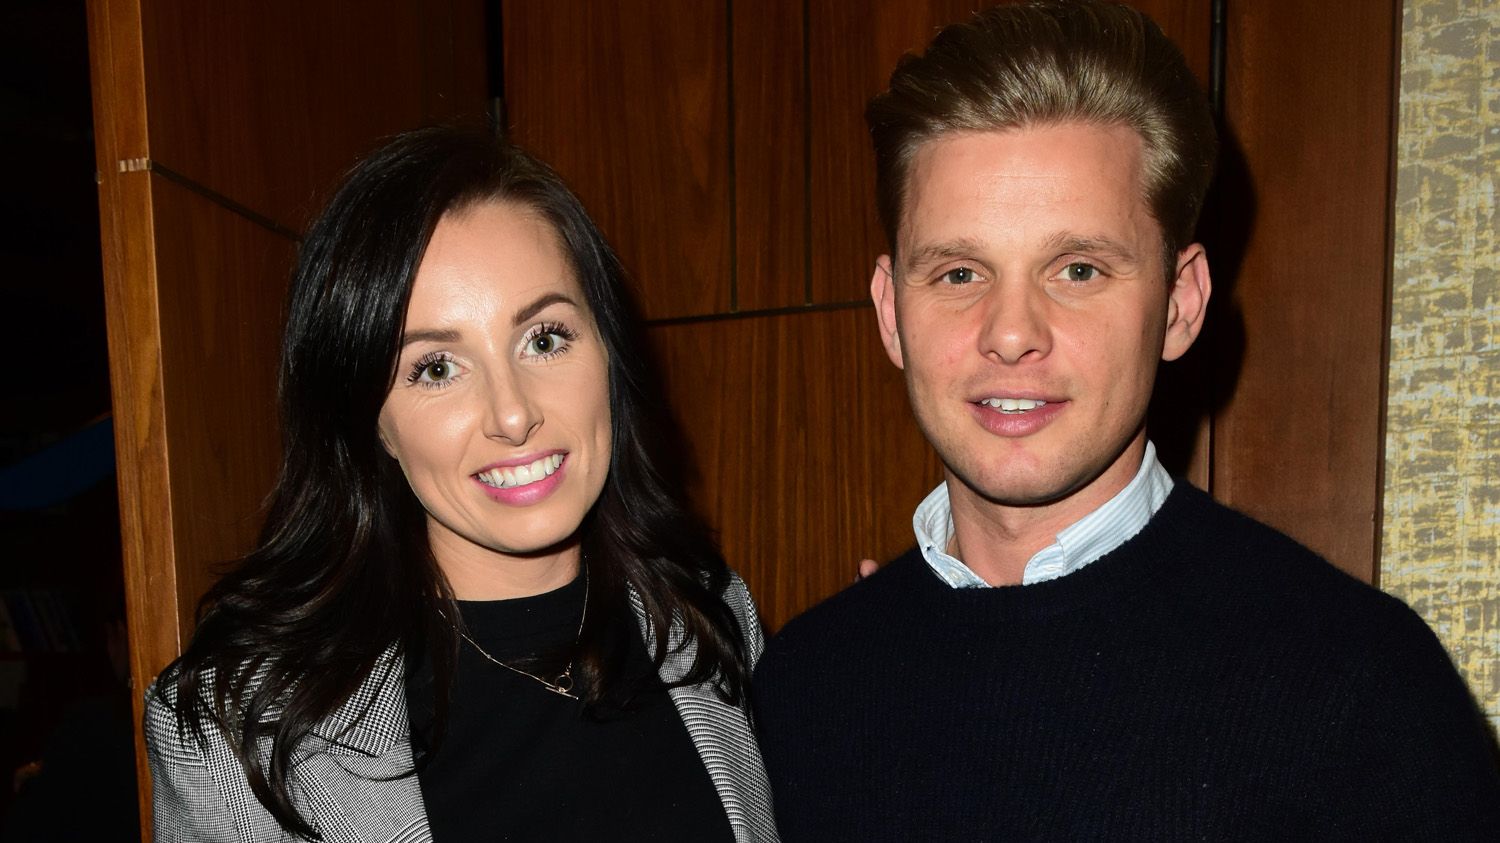 Jeff Brazier announces split from wife Kat hq nude photo